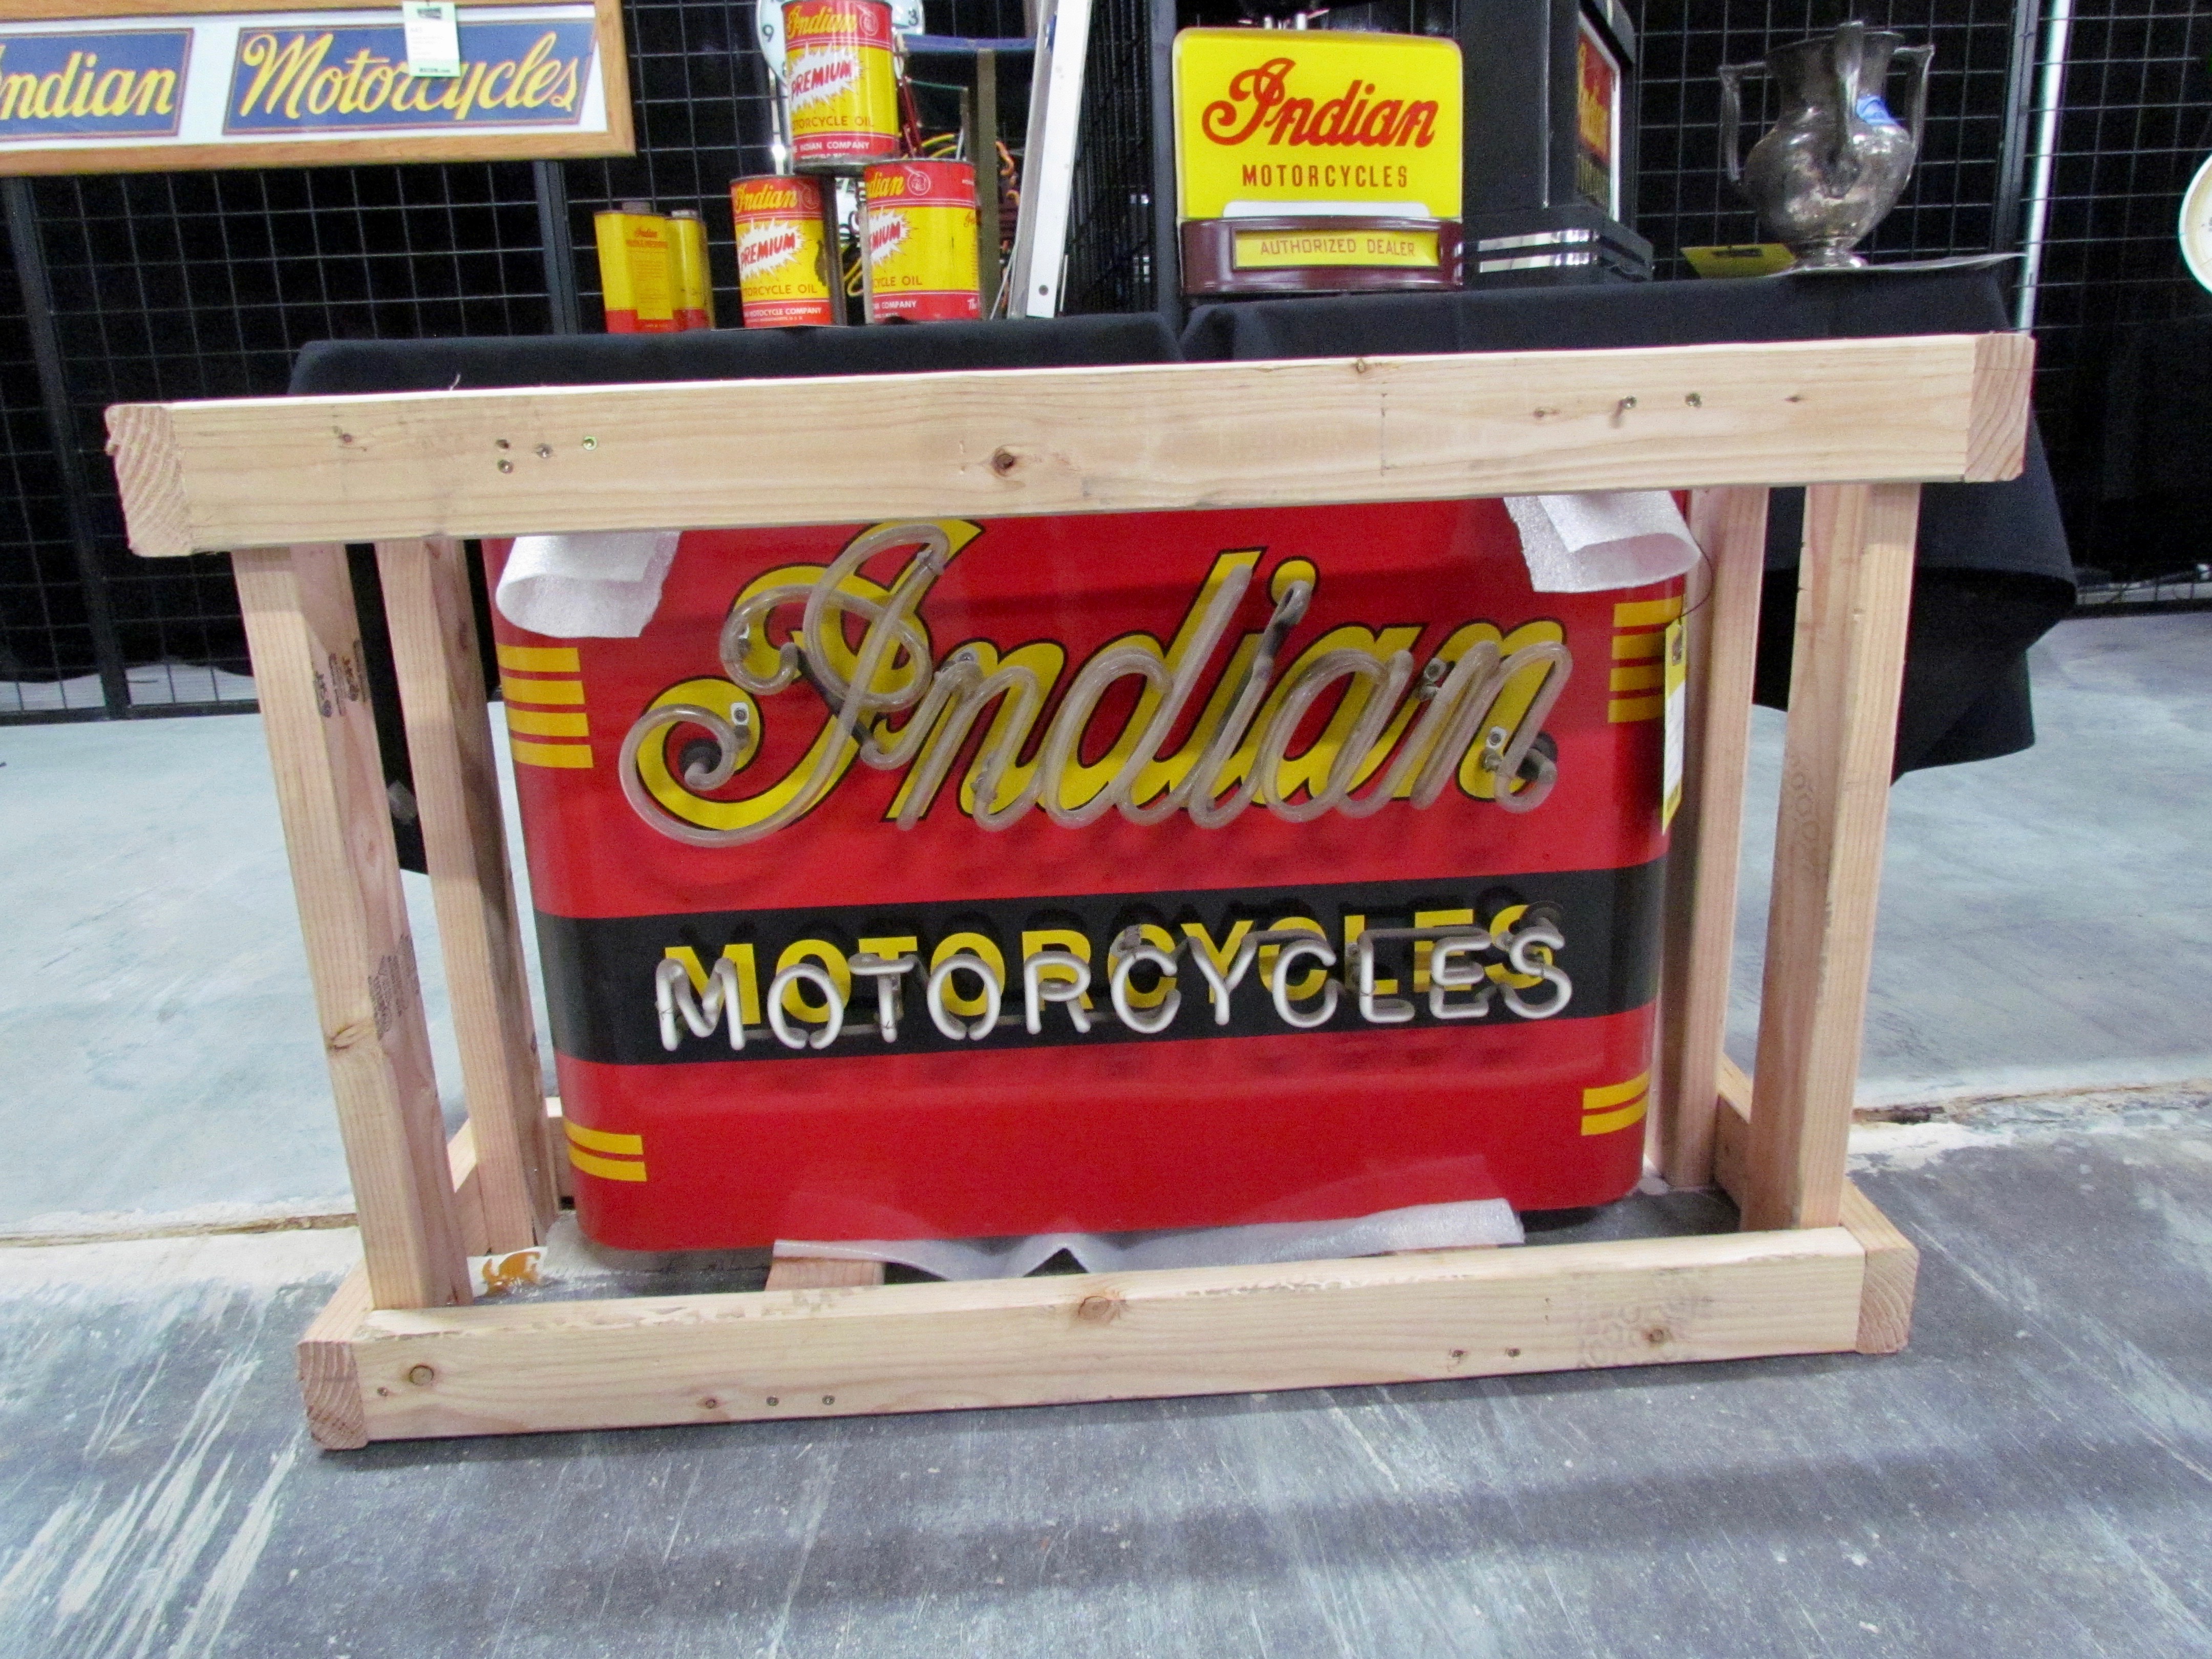 Mecum, Barn-found trove of Indian motorcycles and materials goes to auction, ClassicCars.com Journal